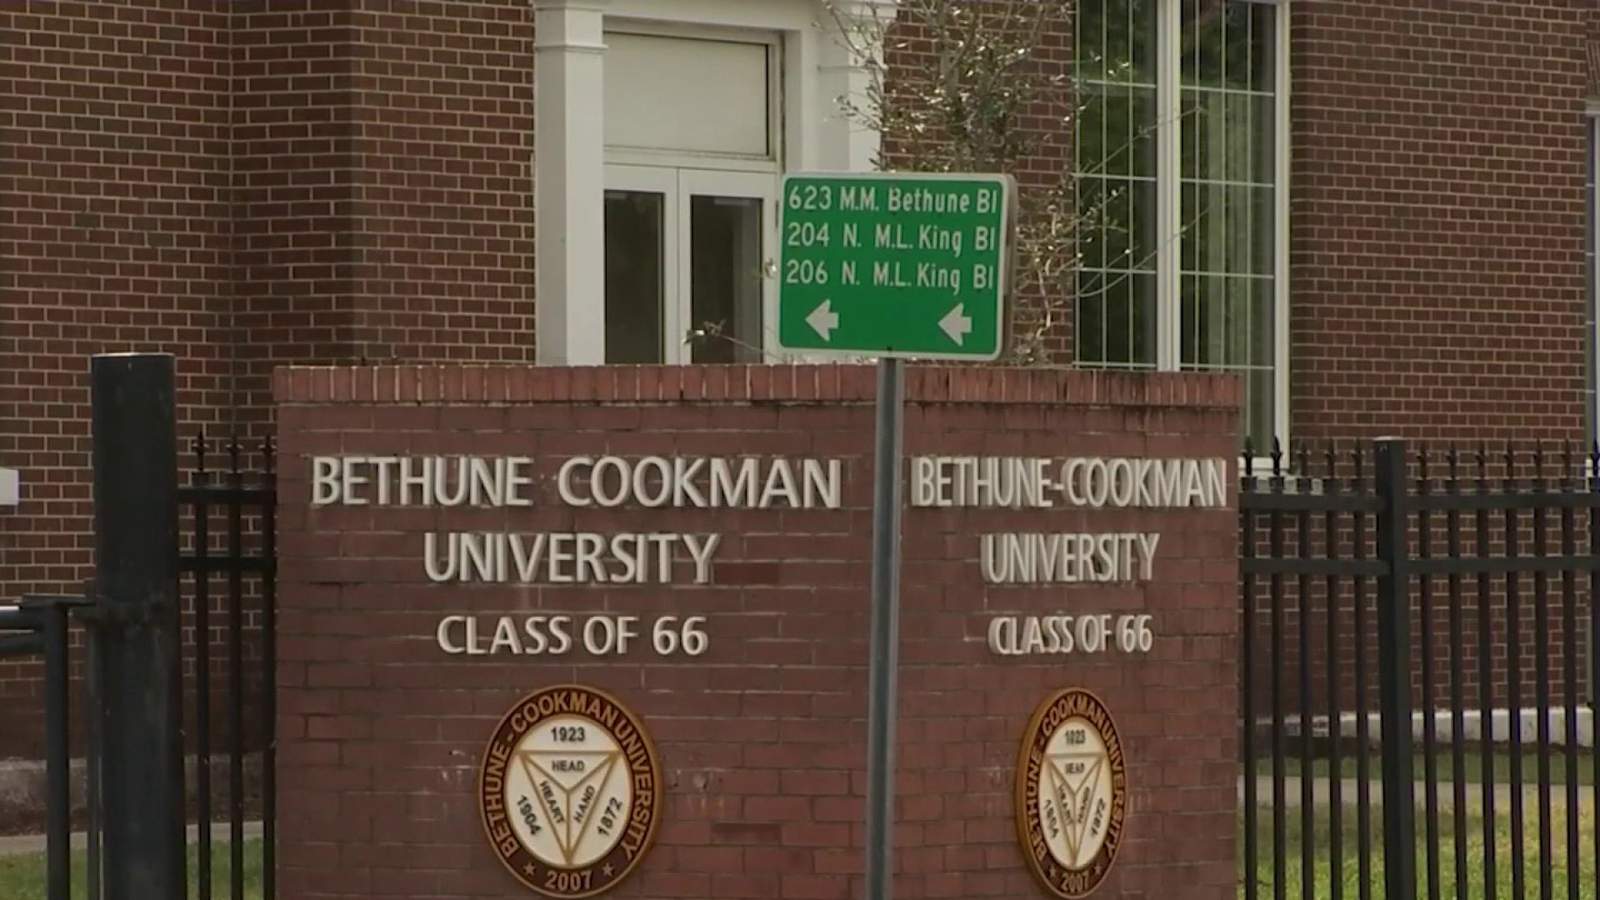 Bethune-Cookman University welcoming students back to campus